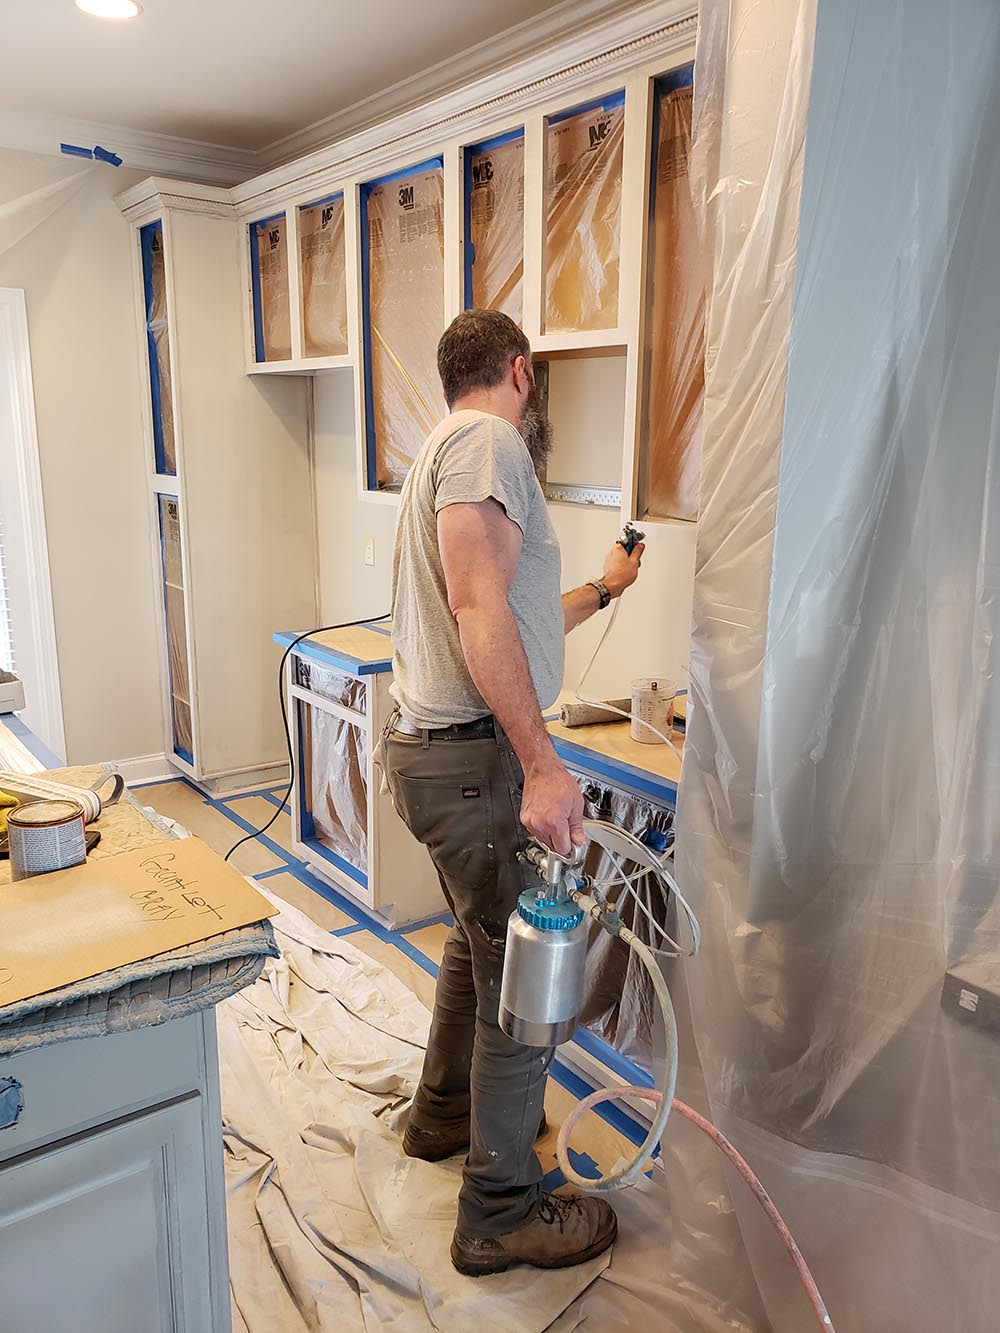 Painting Cabinets Charlotte Nc | Cabinets Matttroy